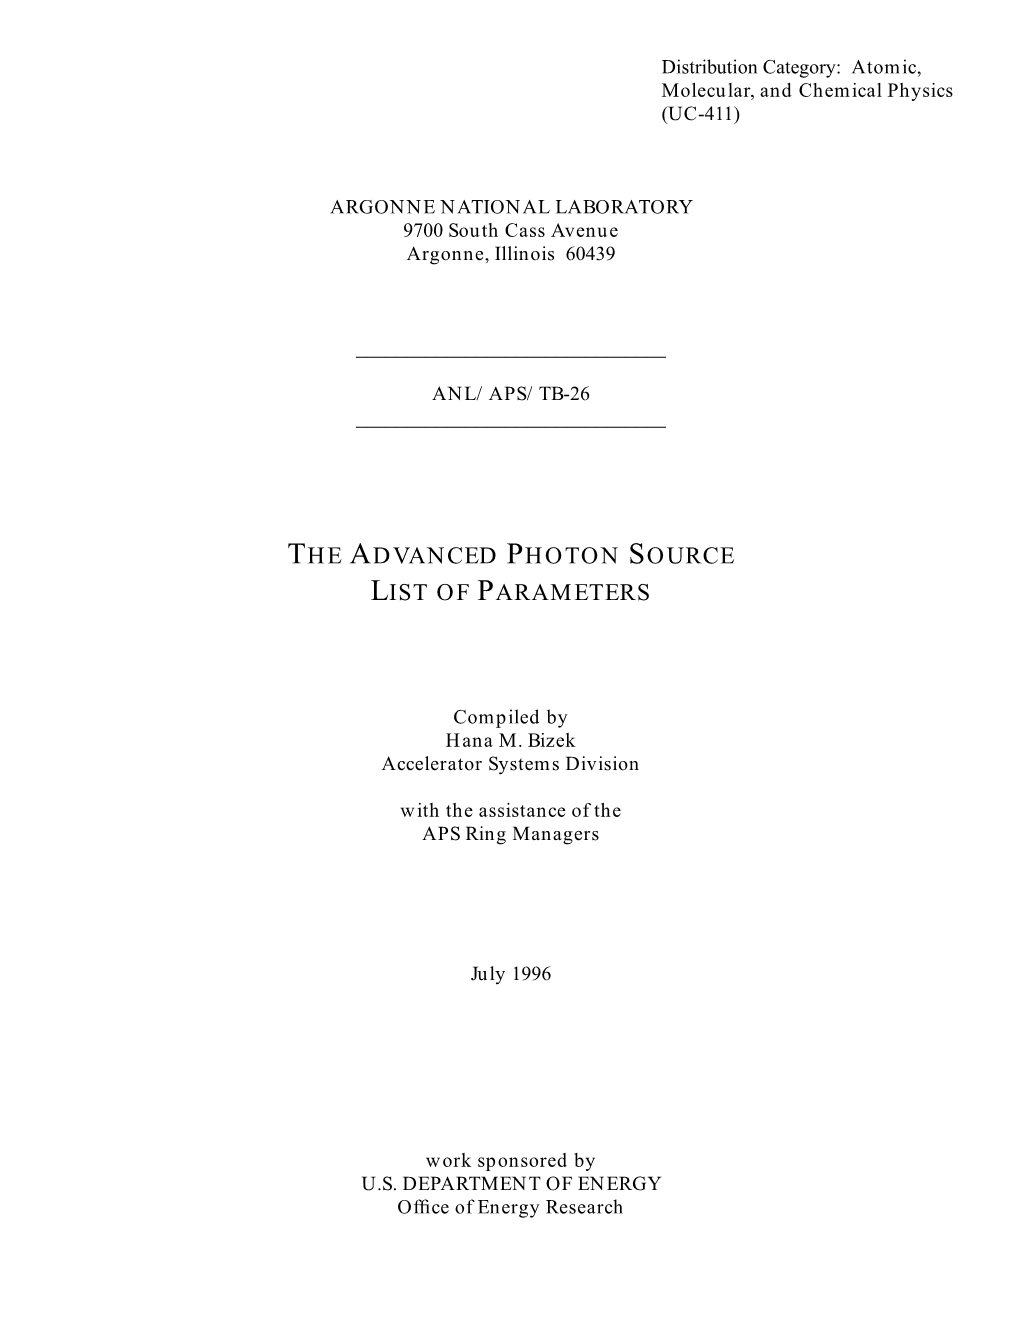 The Advanced Photon Source List of Parameters